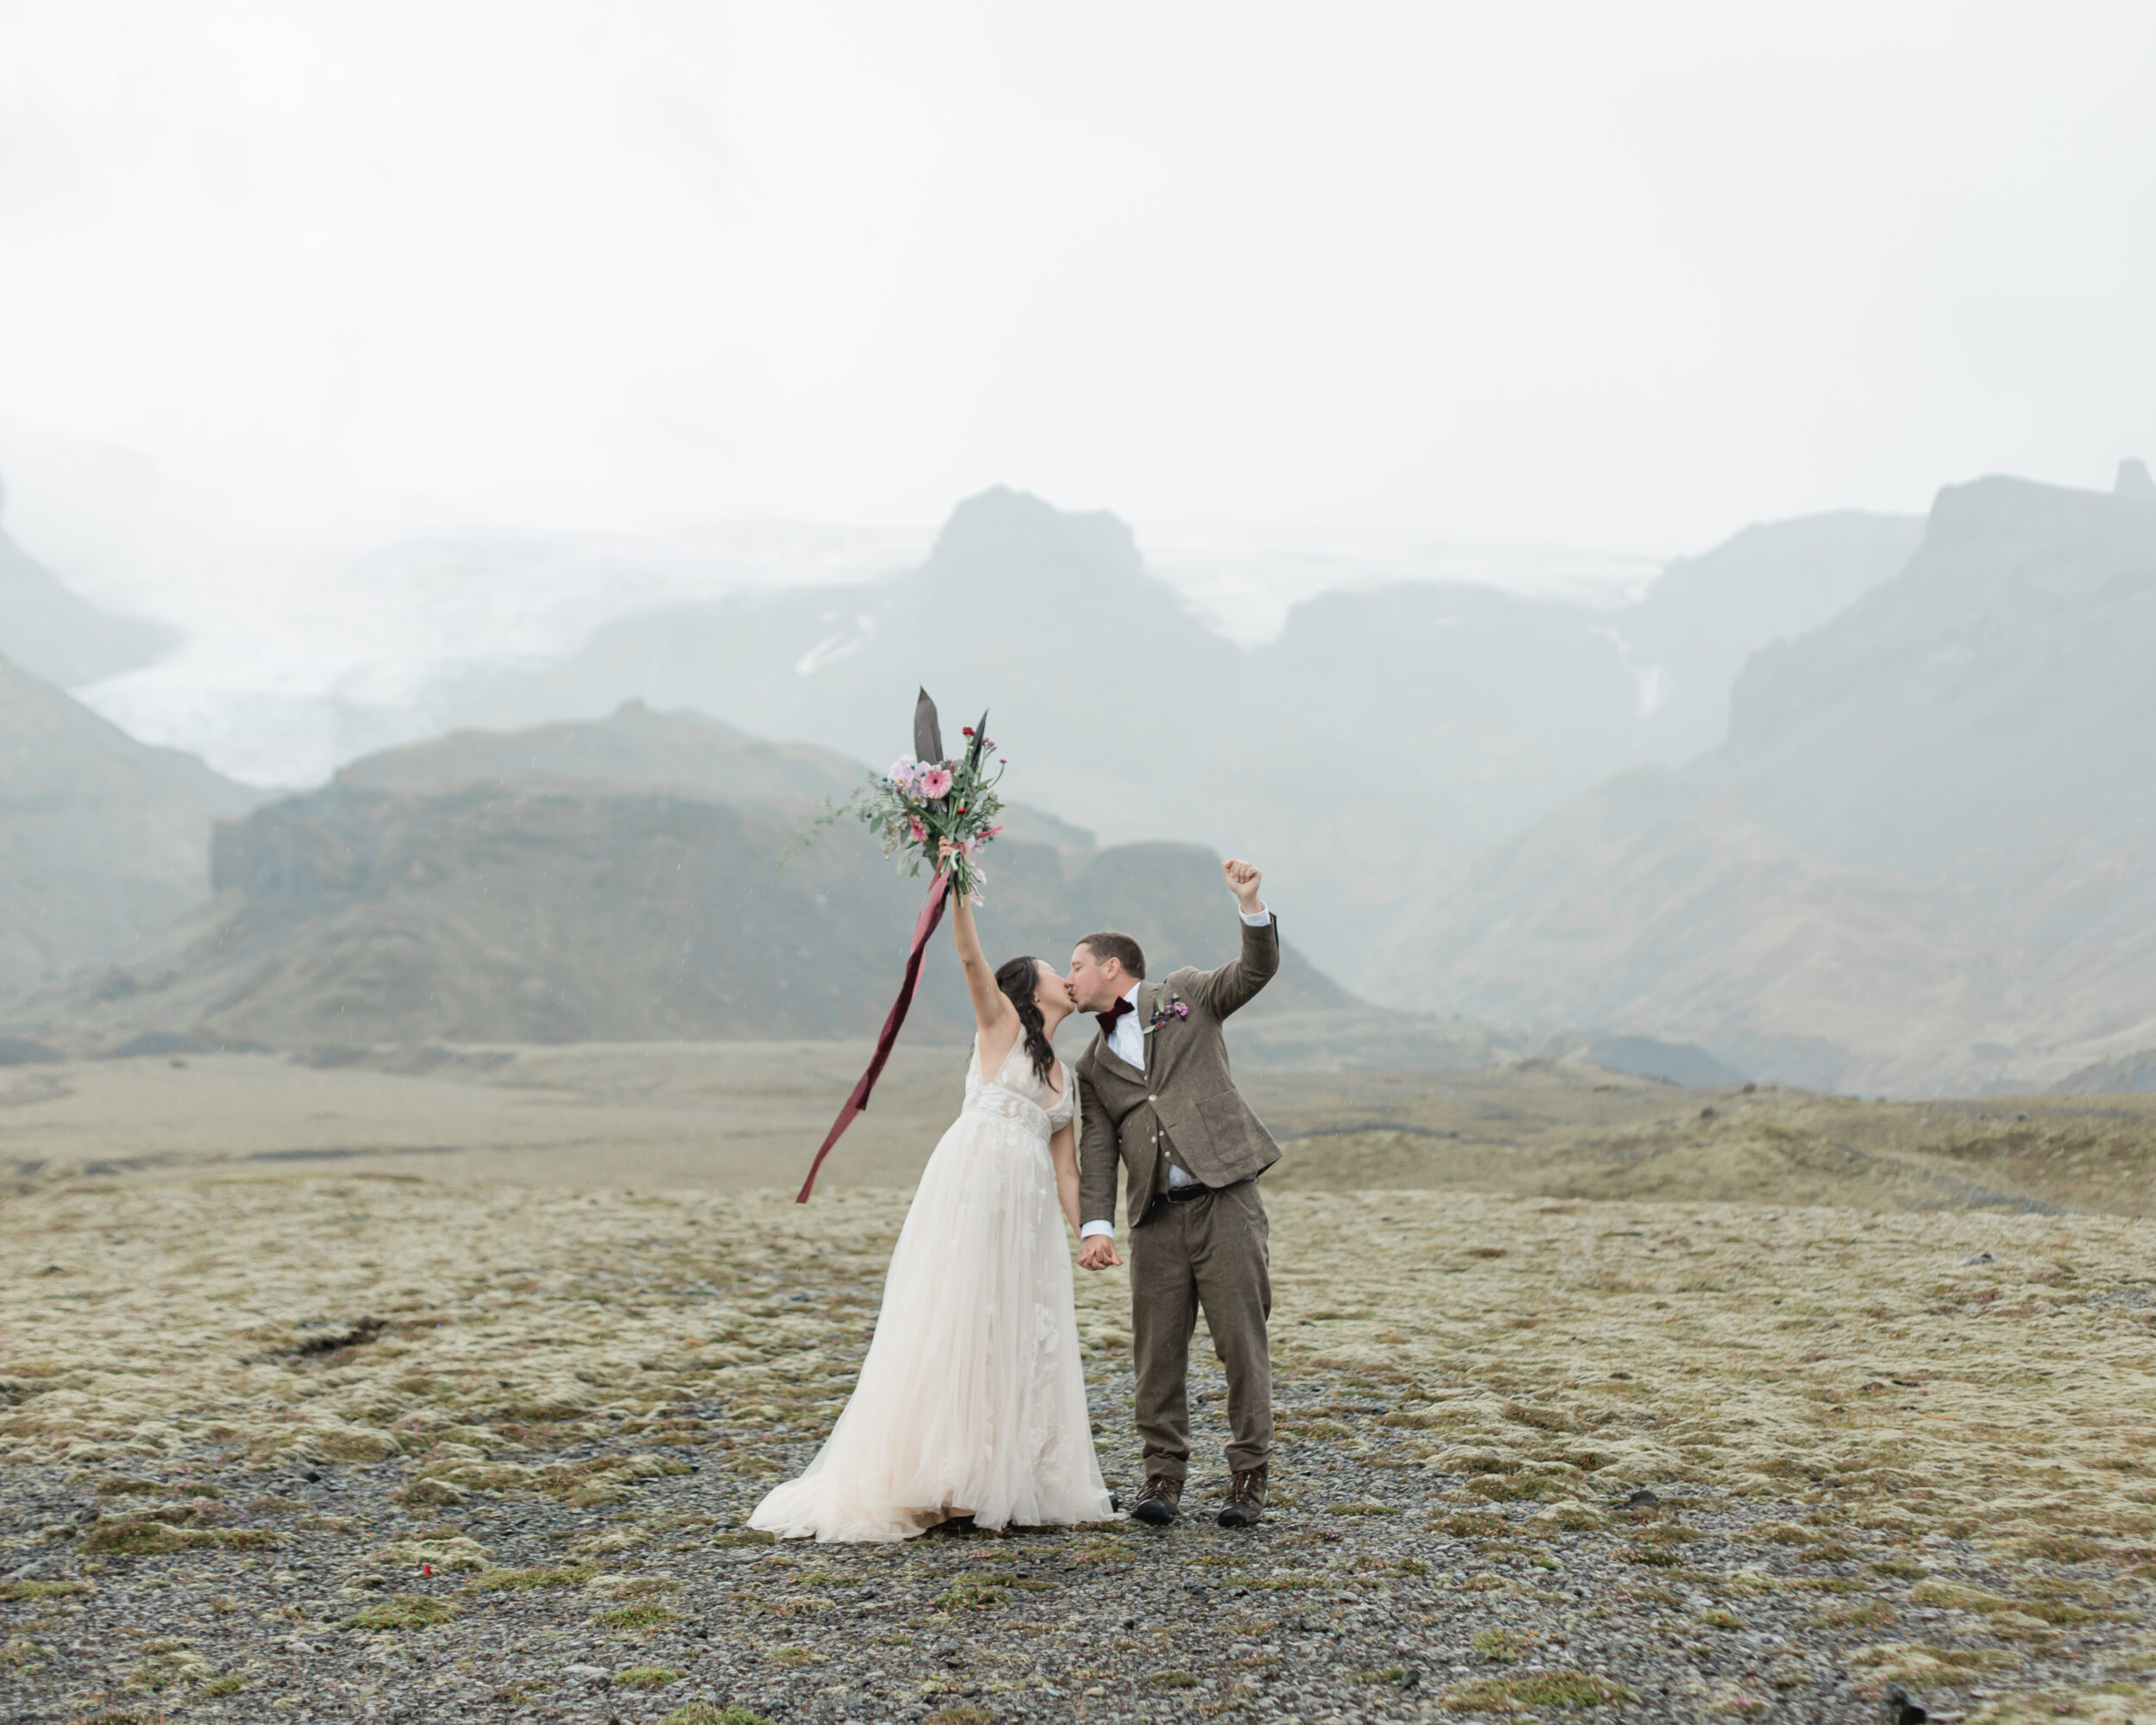 A couple celebrates their wedding ceremony with cheers and a kiss in Iceland.